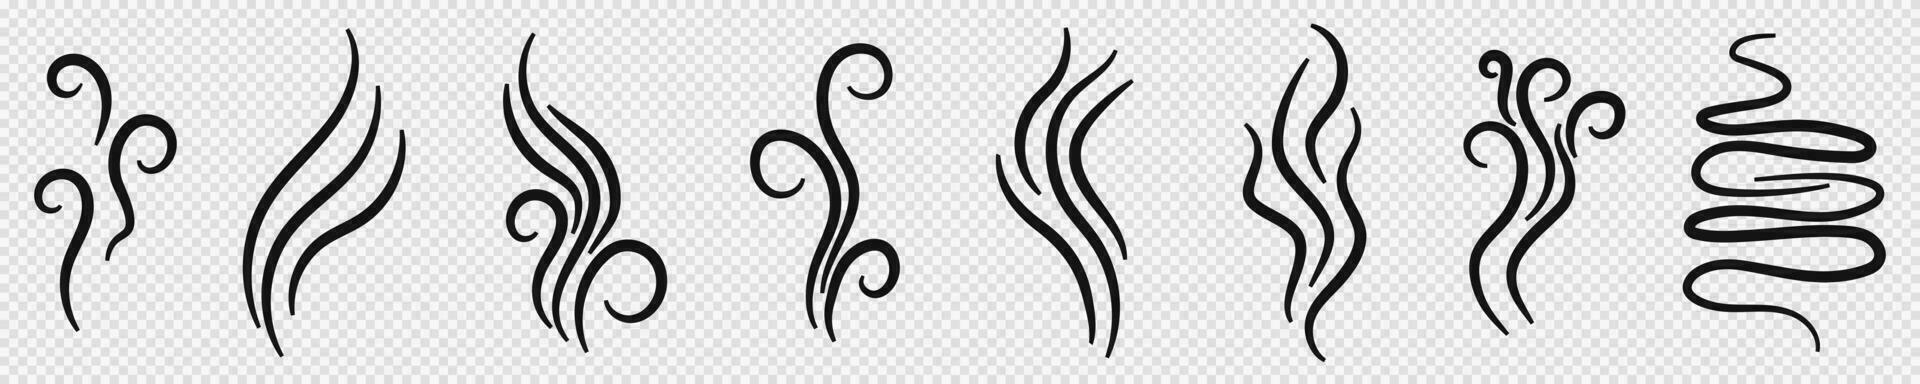 Wind and evaporation symbol. Linear contours of smoke and hot smog with steam and smell vector symbolism